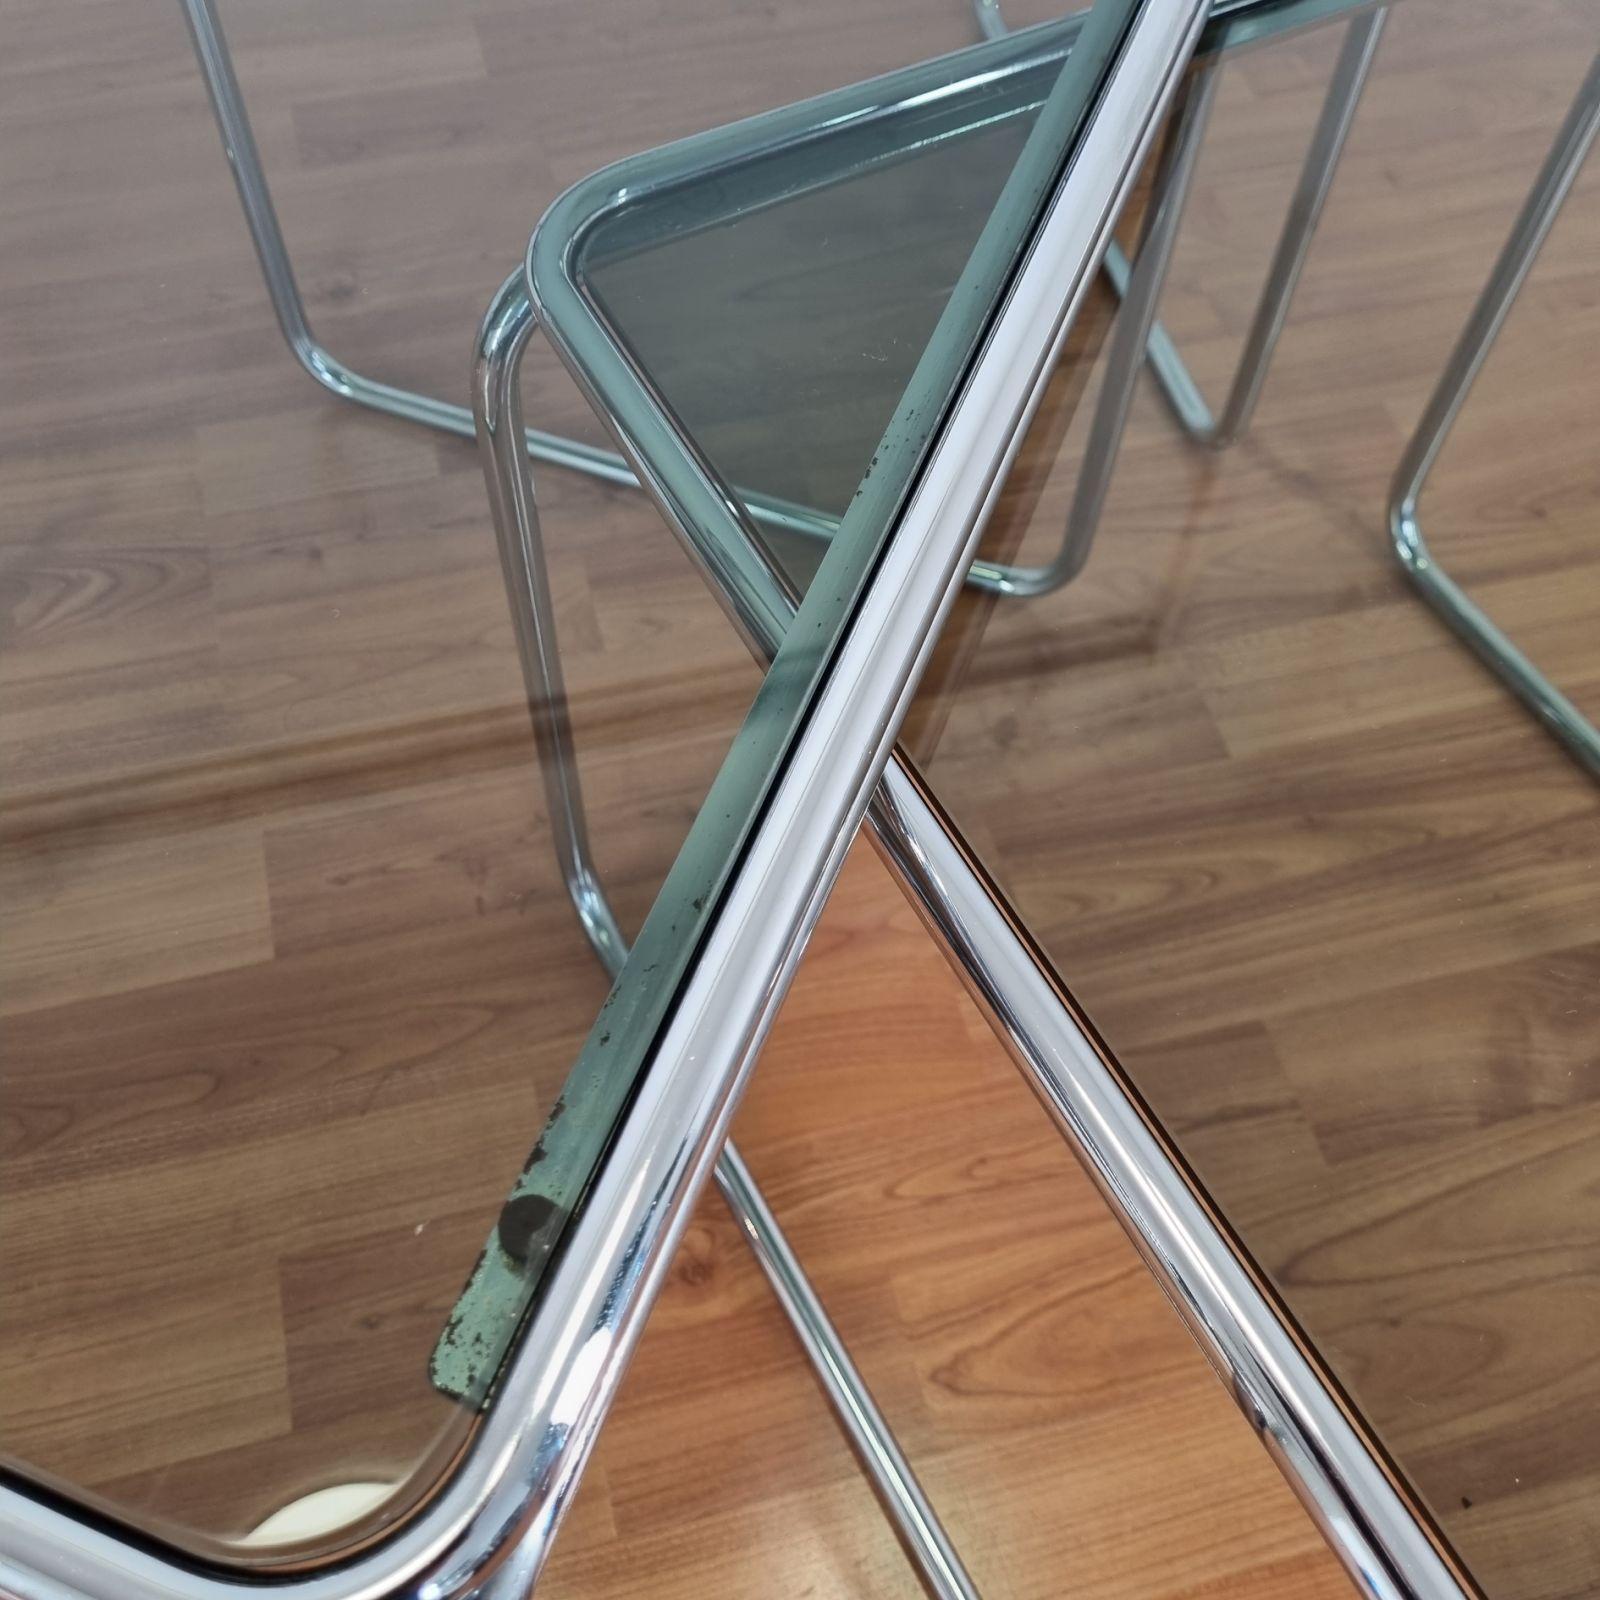 Set of 3 coffee tables from the 70s era. Made in Bauhaus style in Italy.
Made of metal chromed legs and glass. In verry good vintage
condition with minor signs of use.